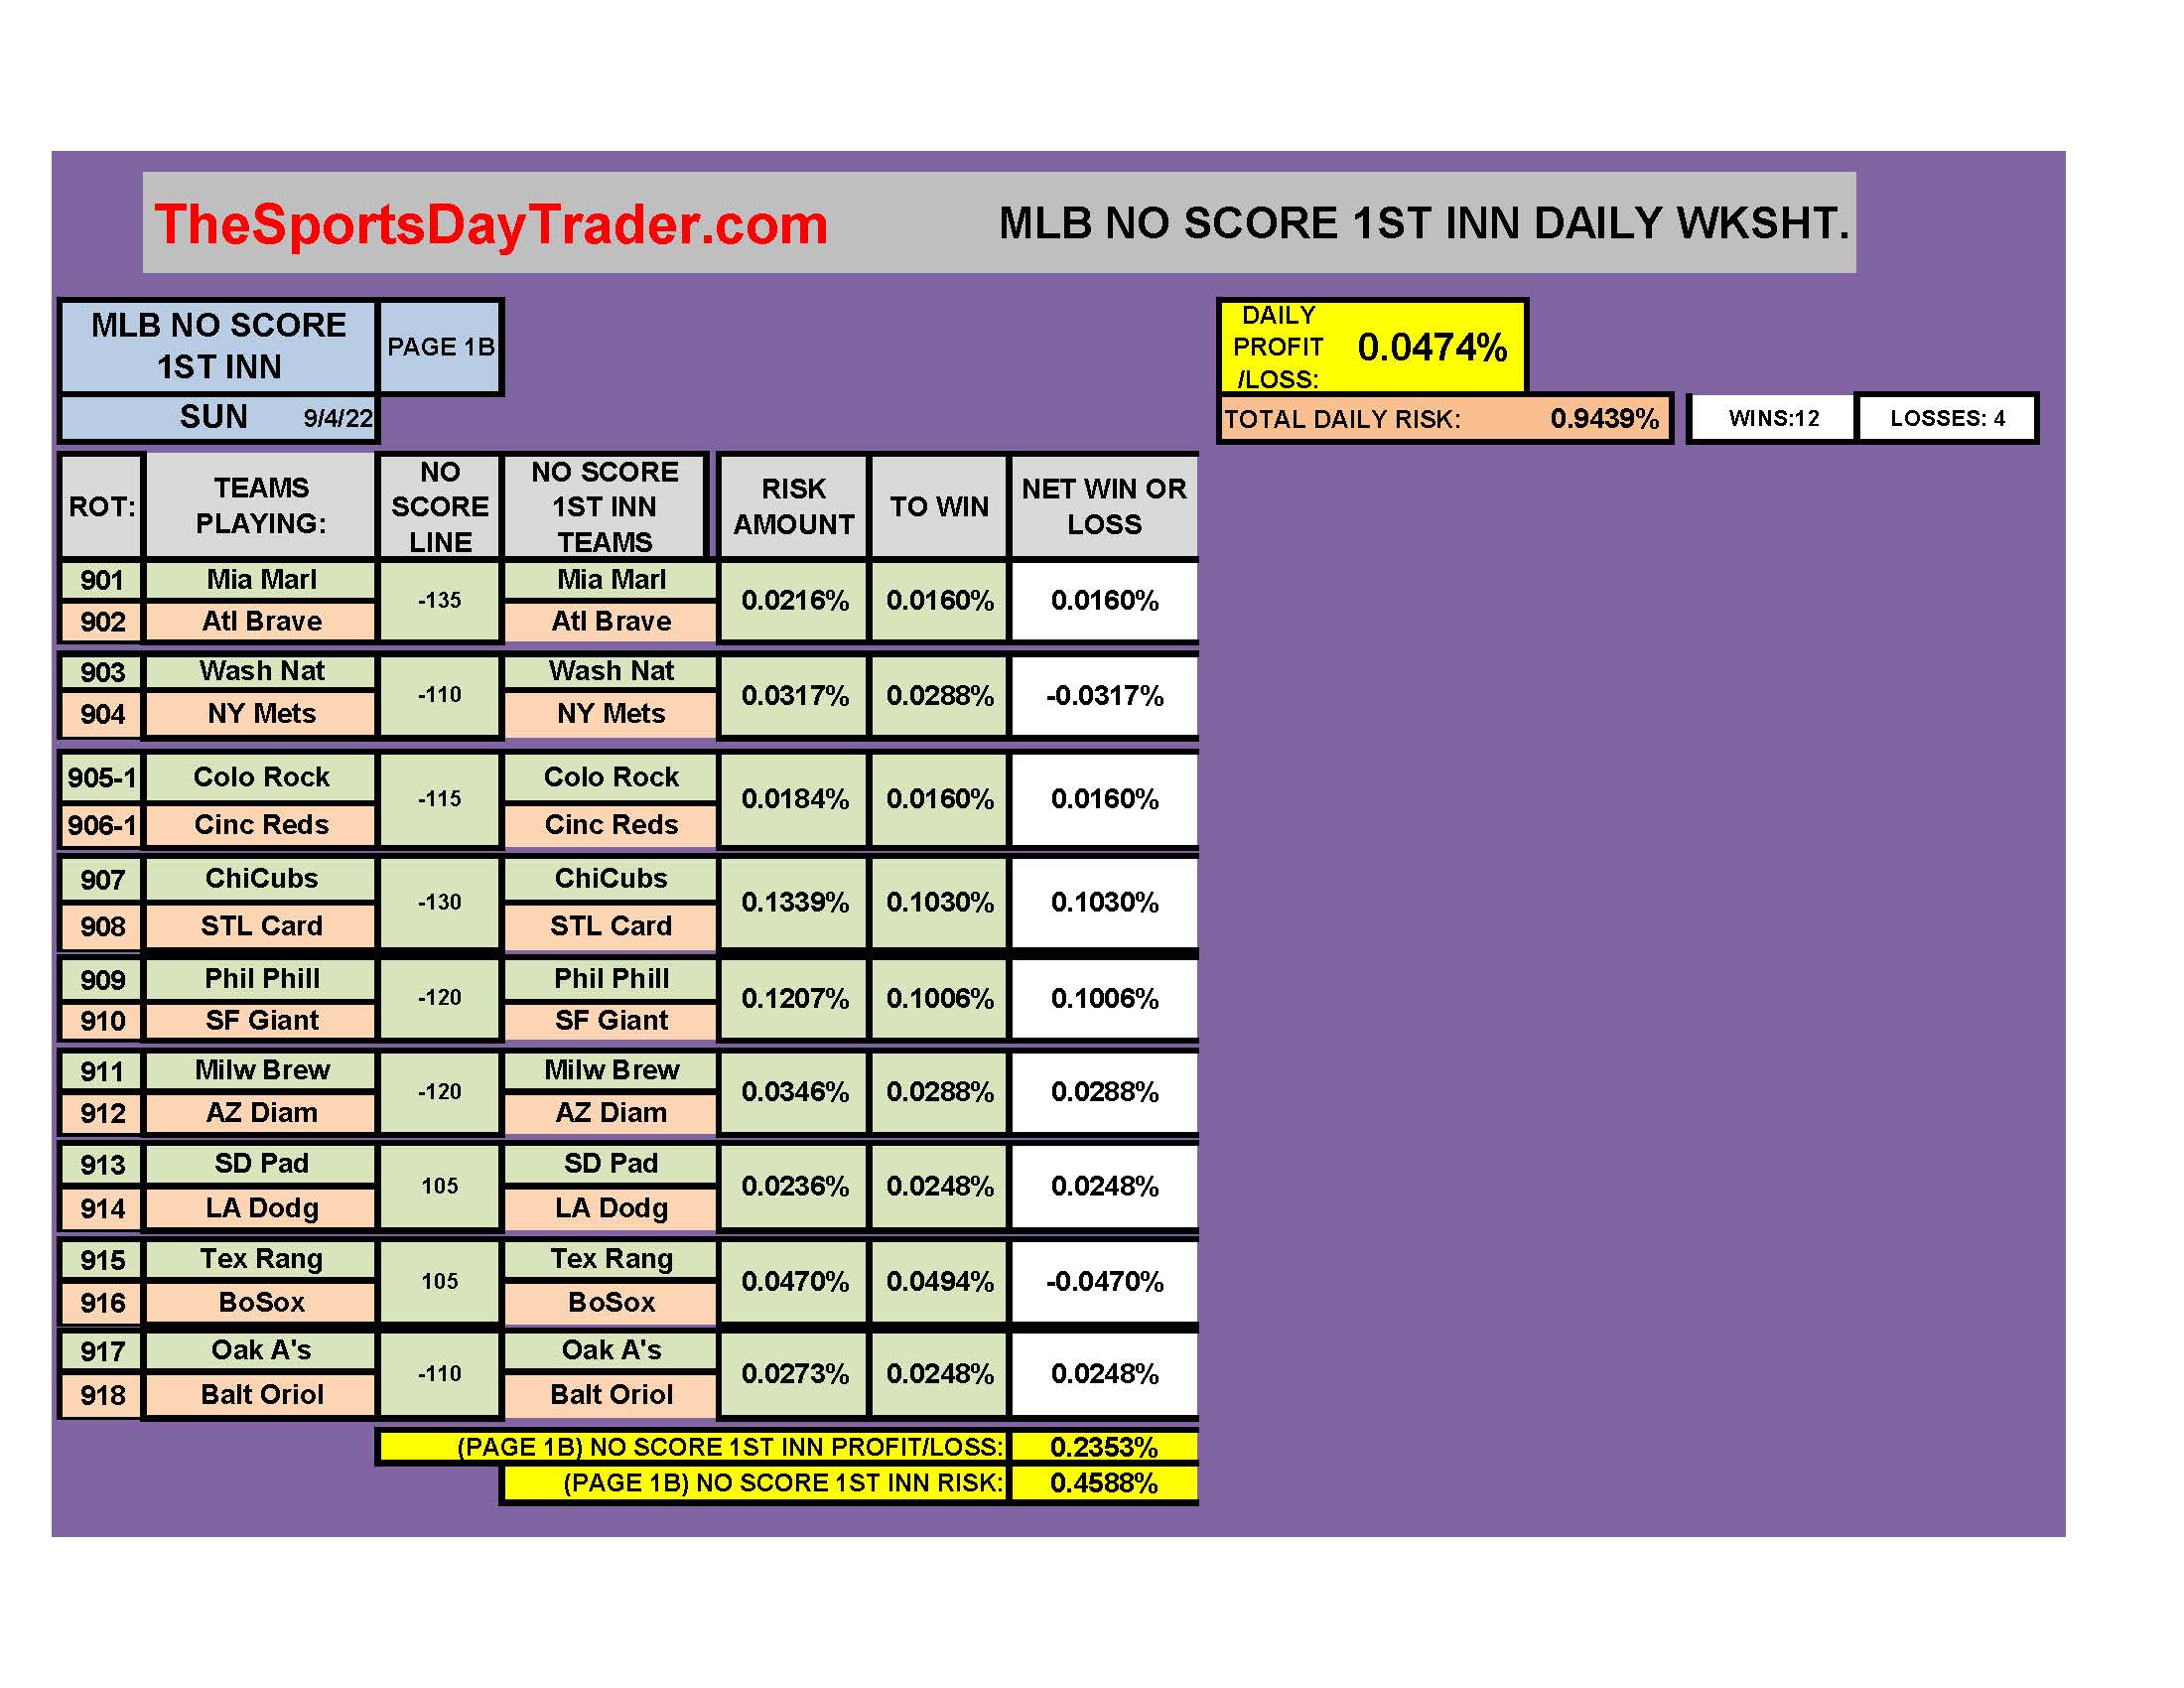 MLB 9/4/22 NO SCORE 1ST INNING DAILY RESULTS page 1